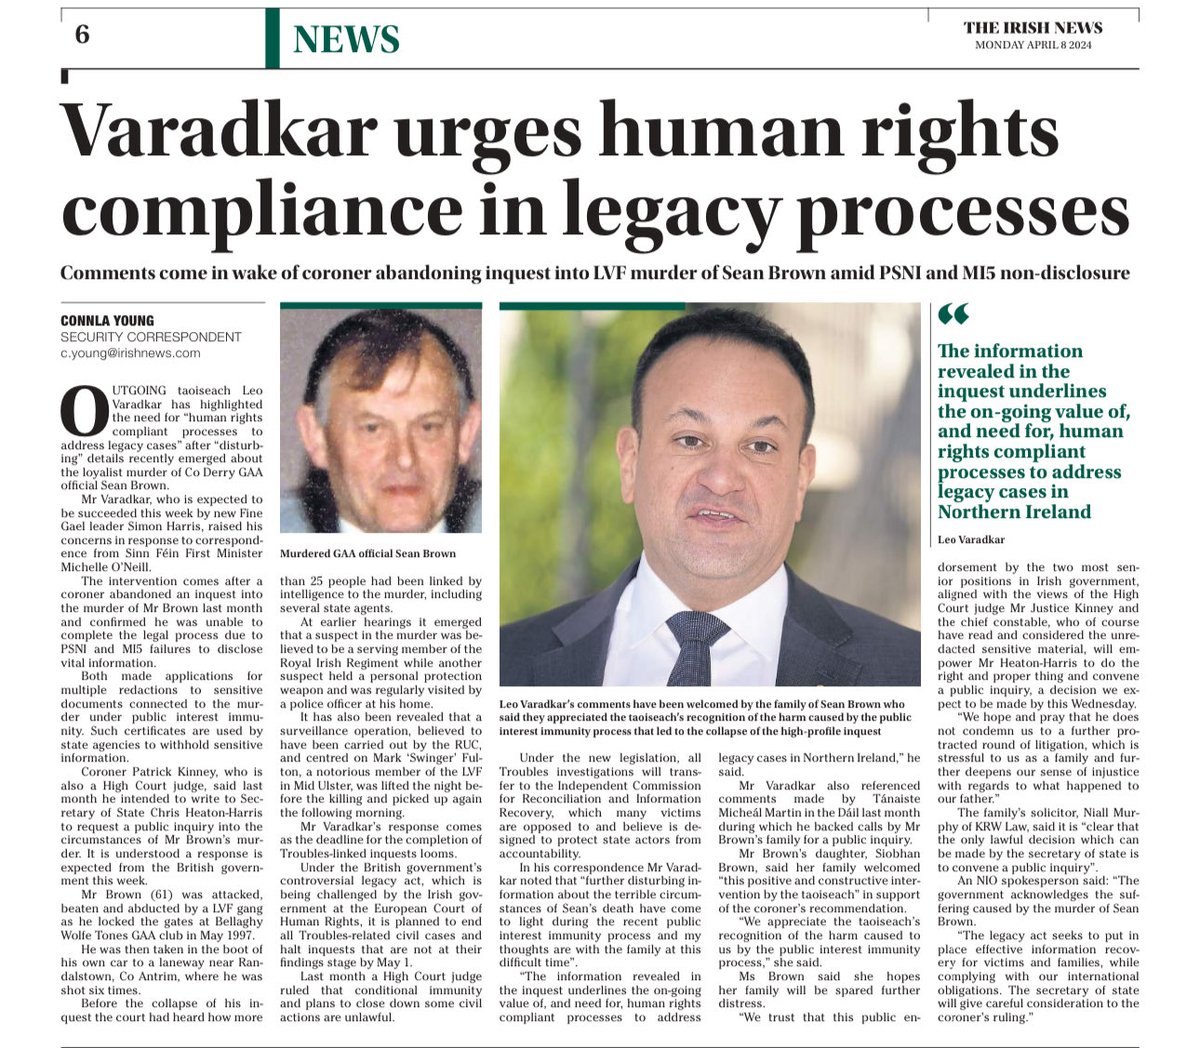 Sean Brown Public Inquiry call : Taoiseach Leo Varadkar has highlighted the need for “human rights compliant processes to address legacy cases” after “disturbing” details recently emerged about the loyalist murder of Co Derry GAA official Sean Brown.